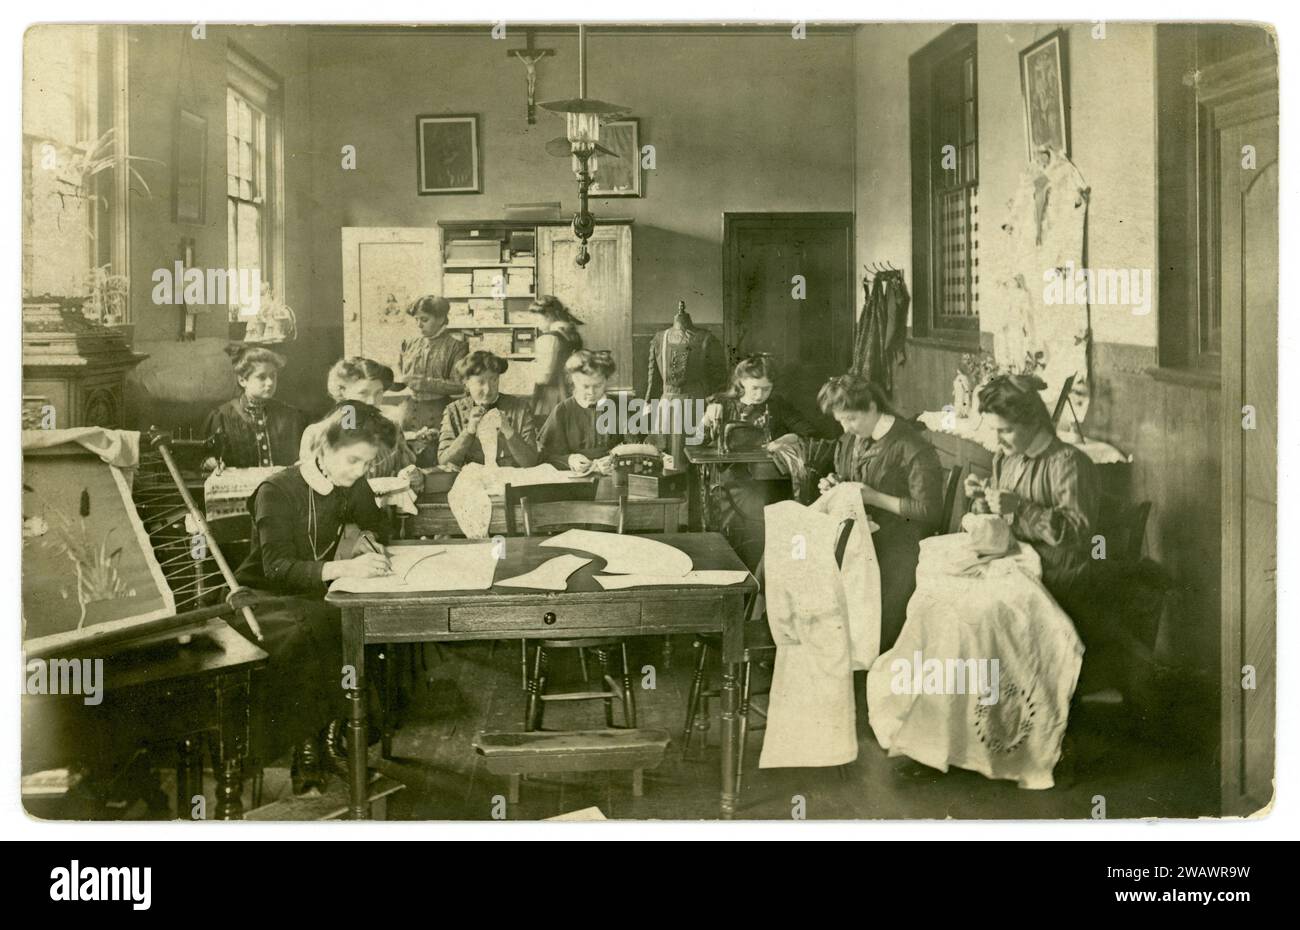 Original Edwardian postcard of young women in a Christian Catholic classroom with sewing, embroidery in a  needlework room at relgious school or convent for young ladies (there is a shrine to Our Lady.) The girls would have been trained in all aspects of running a household. Postcard dated / posted 1908, London, U.K. Stock Photo